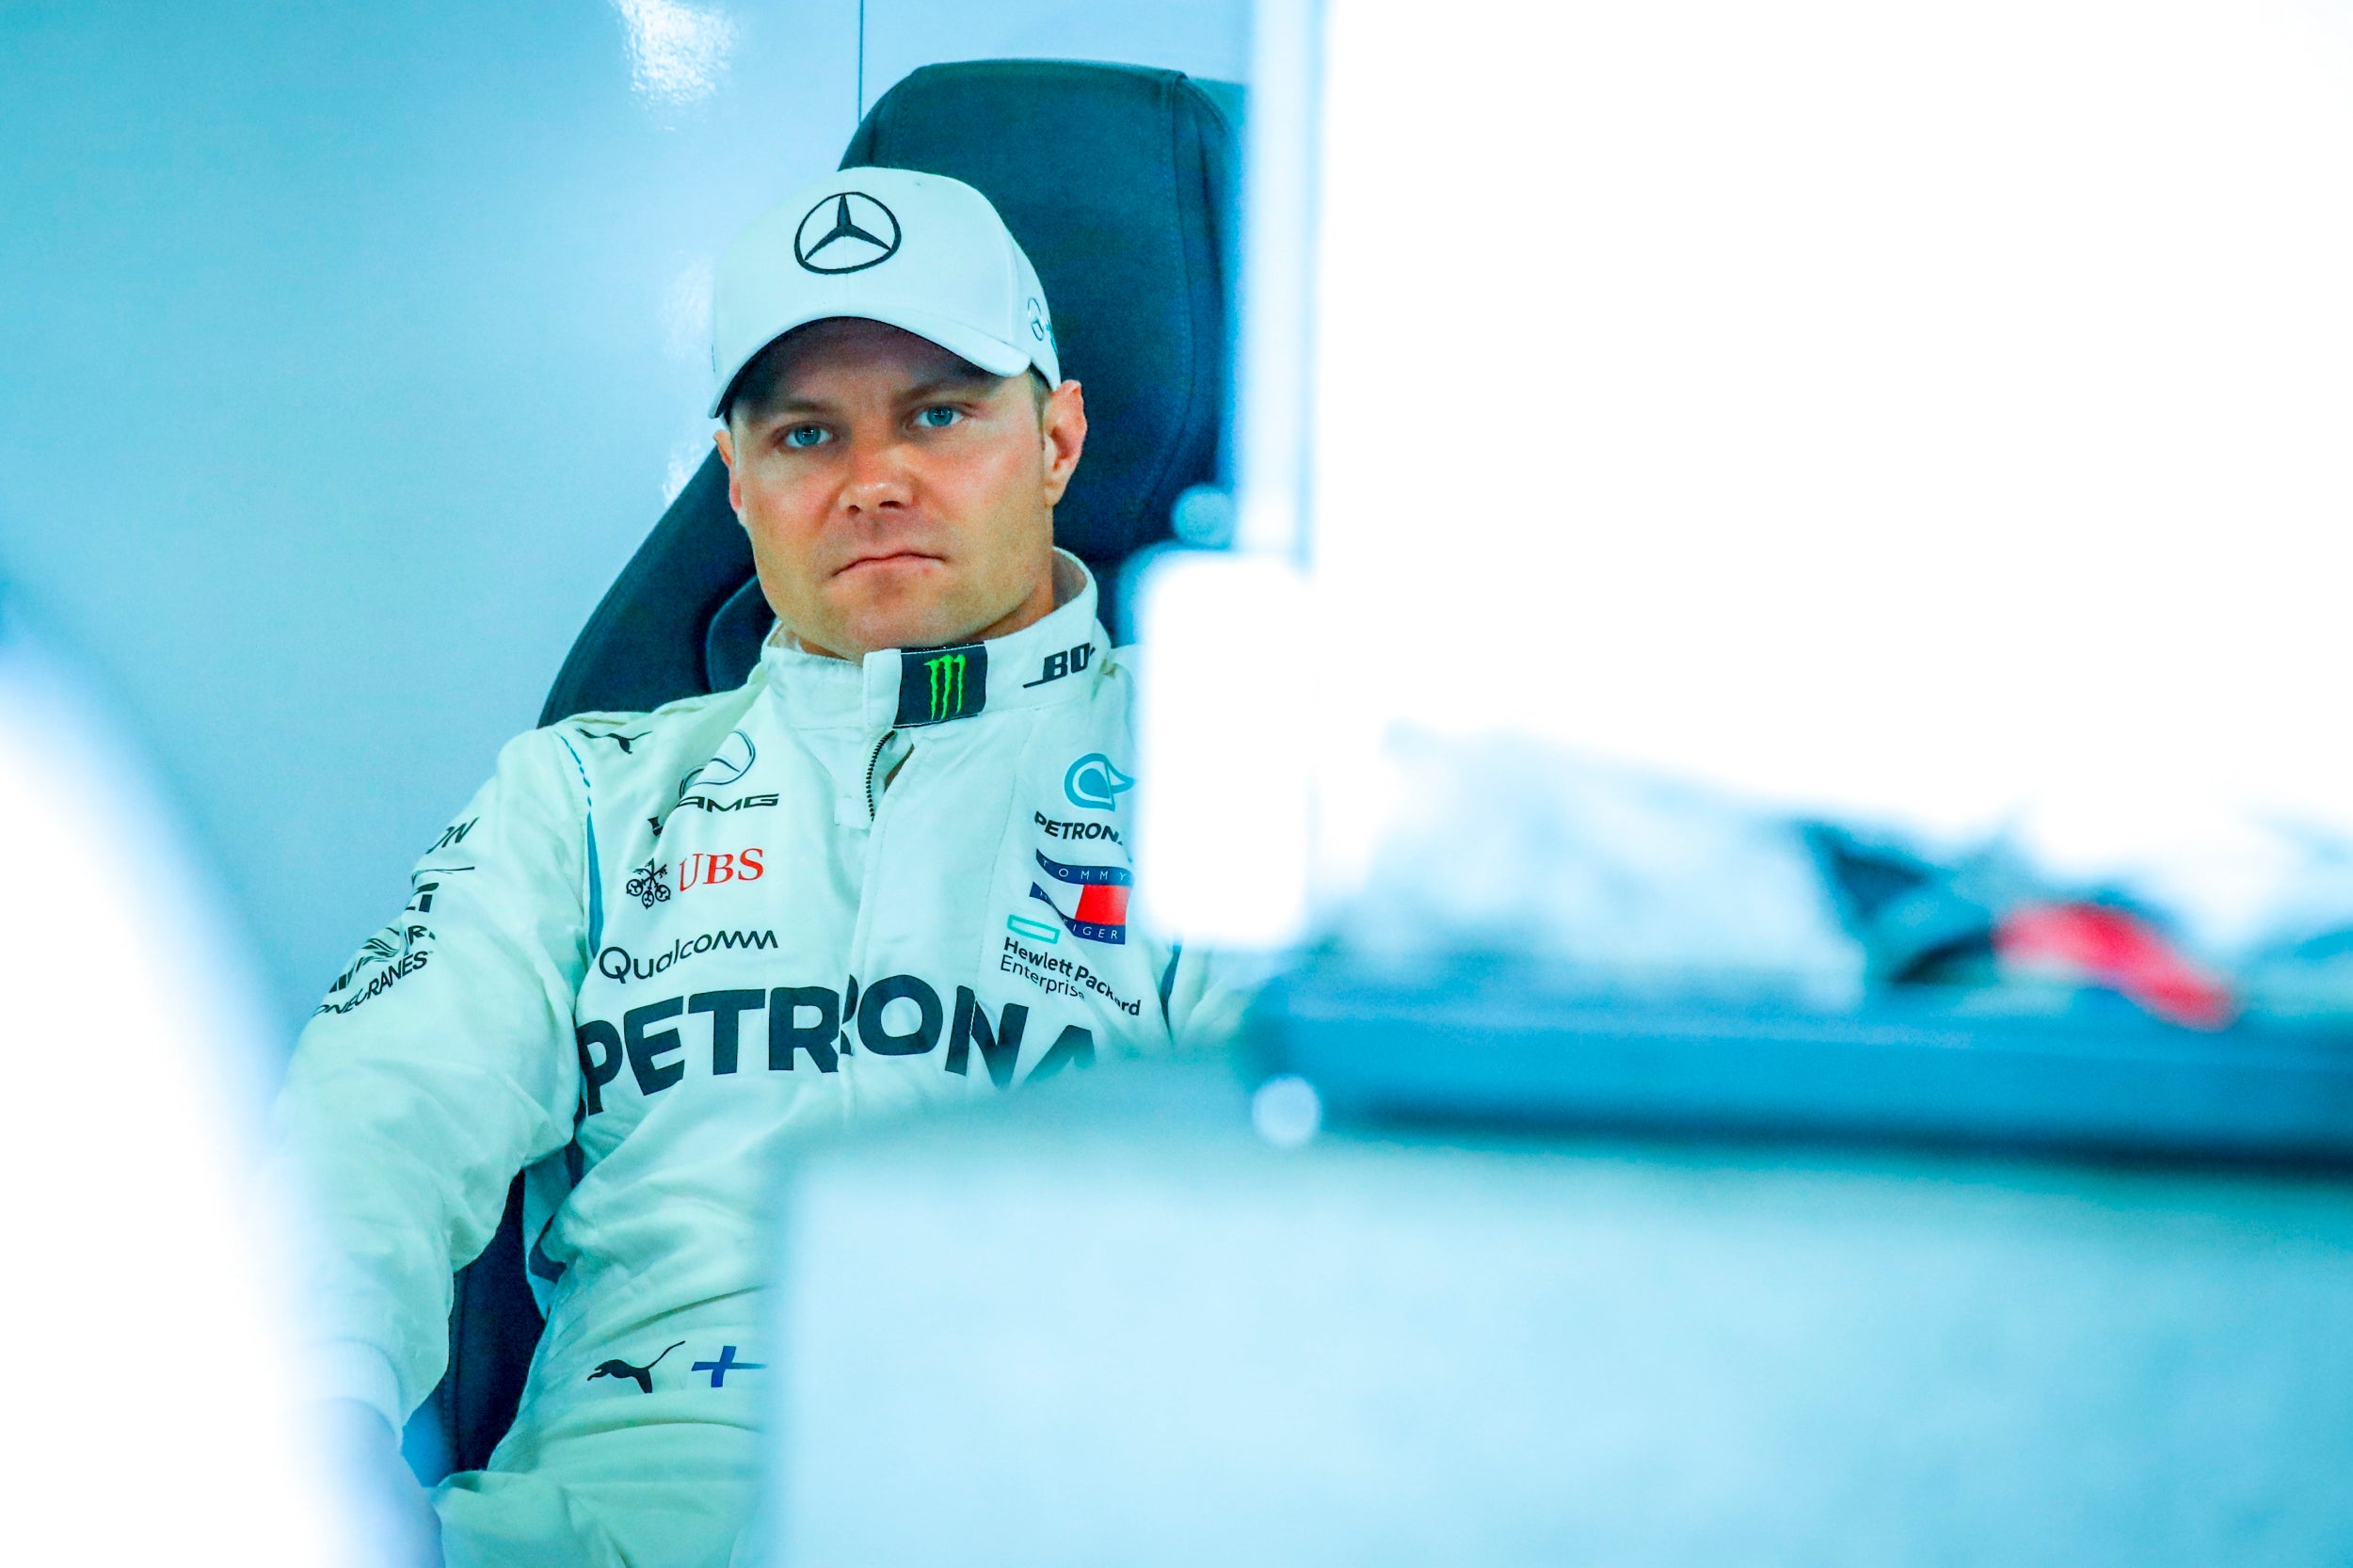 Bottas must raise his game if he is to have a long-term future at Mercedes